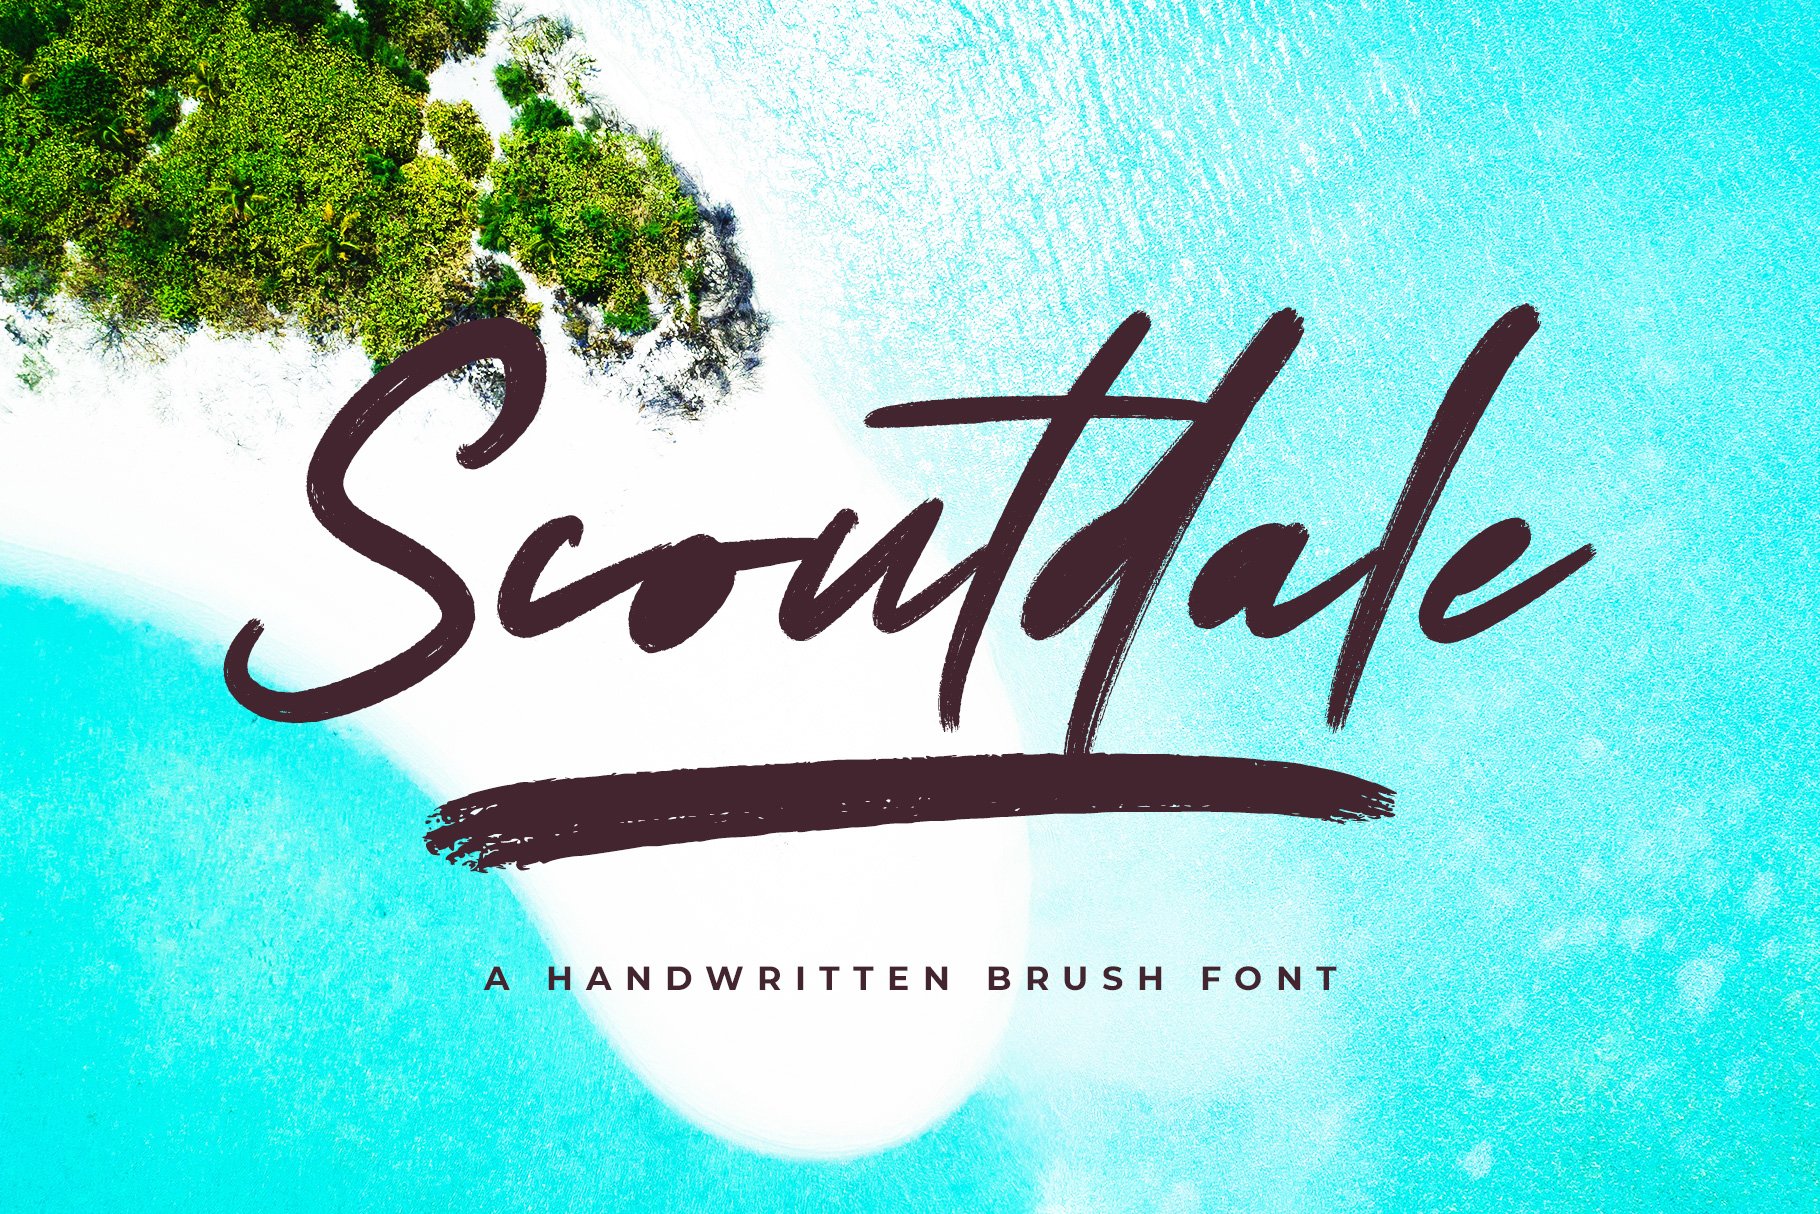 Scoutdale | Handwritten Brush Font cover image.